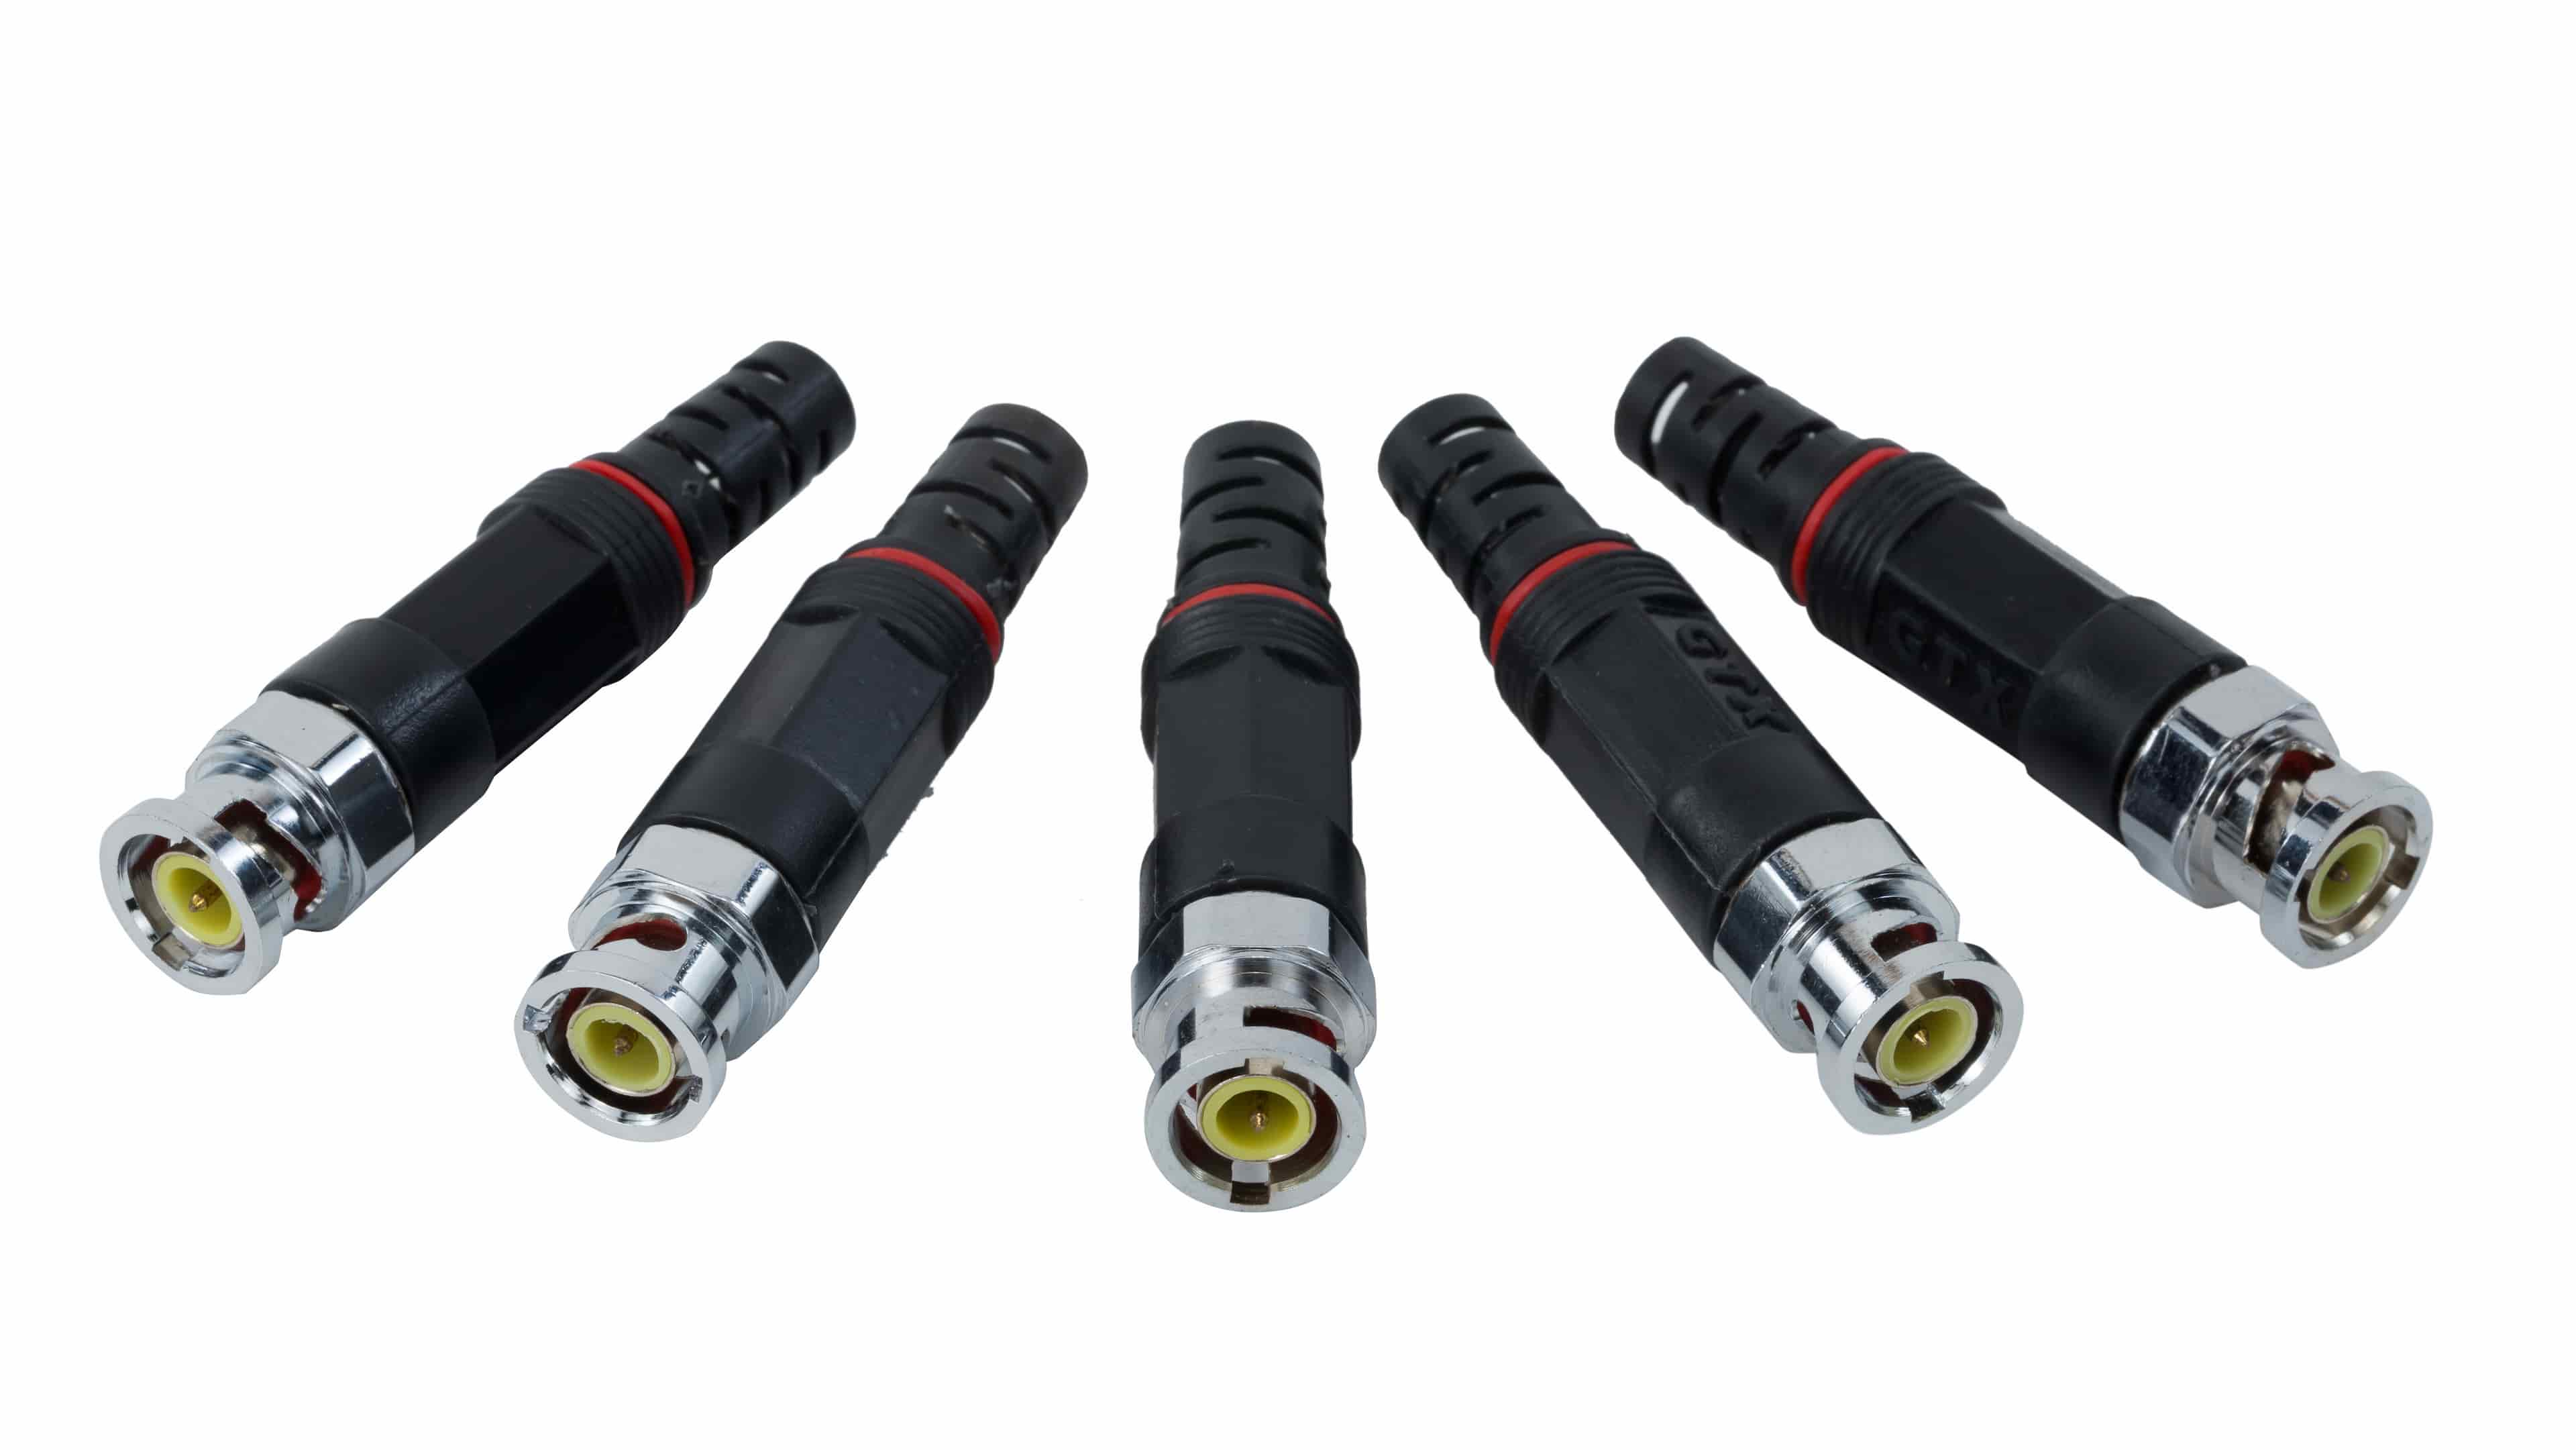 Generic-BNC-Connector-for-CCTV-Camera-Cable-5pcs-Pack-image_2